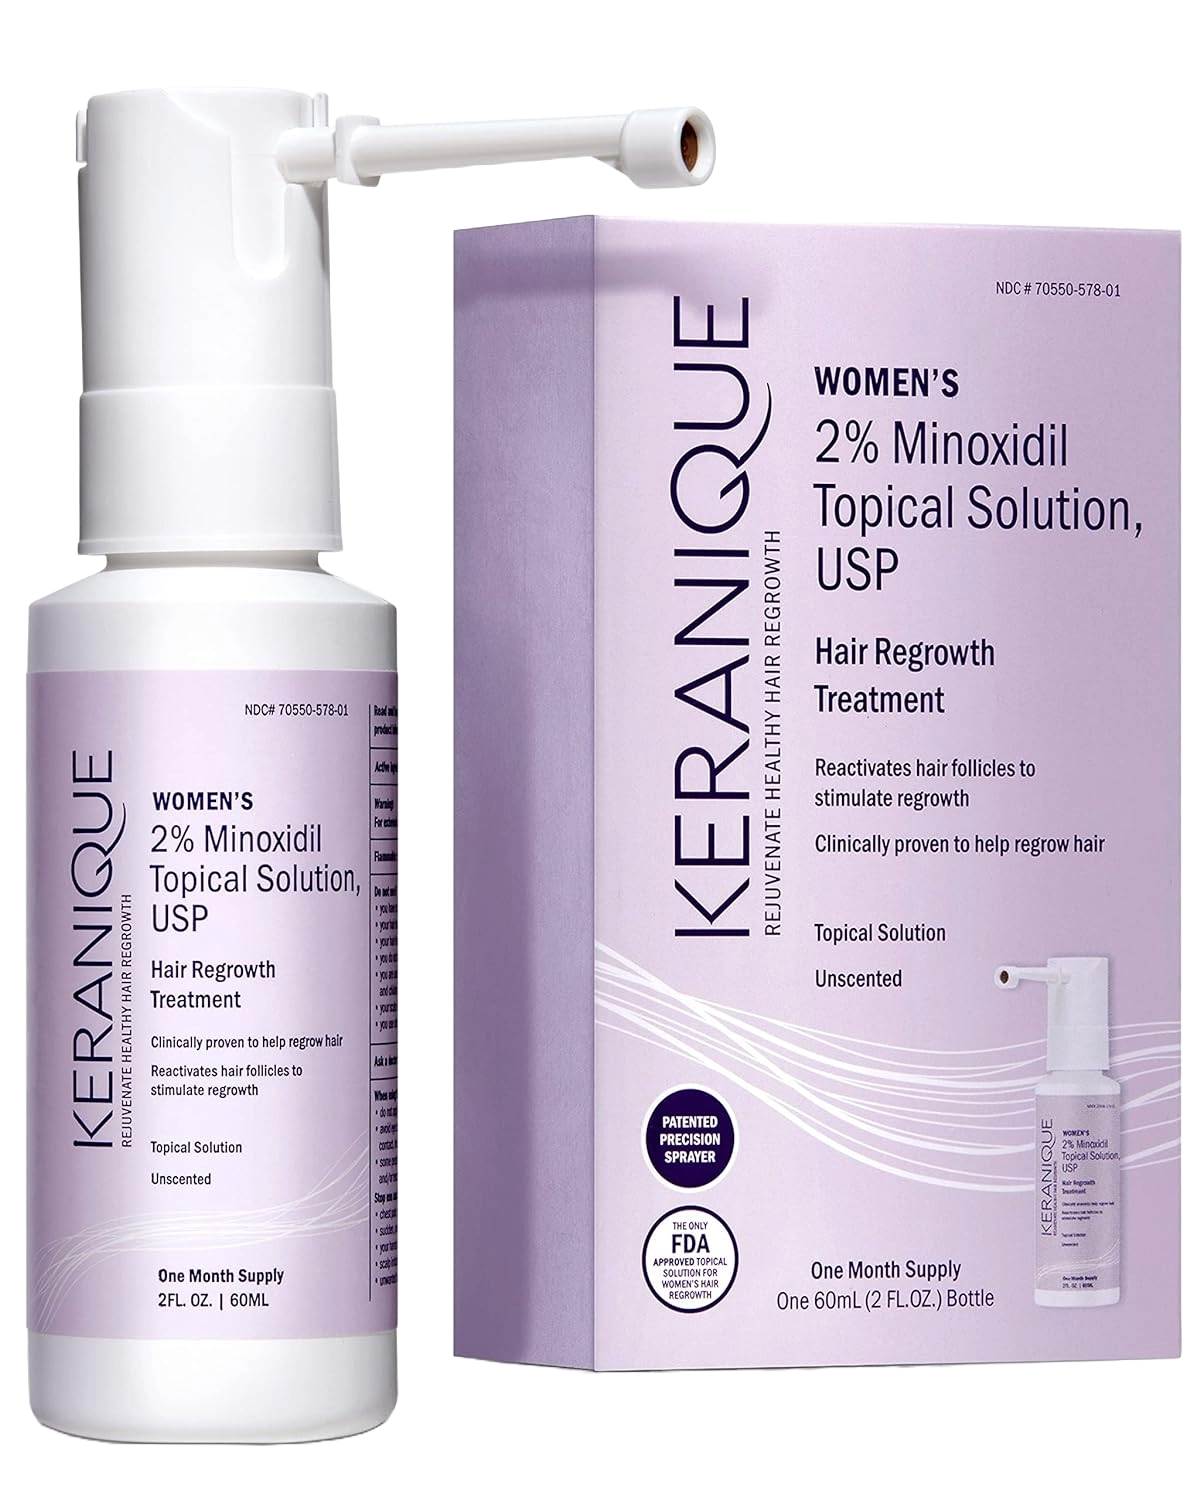 Keranique Hair Regrowth System